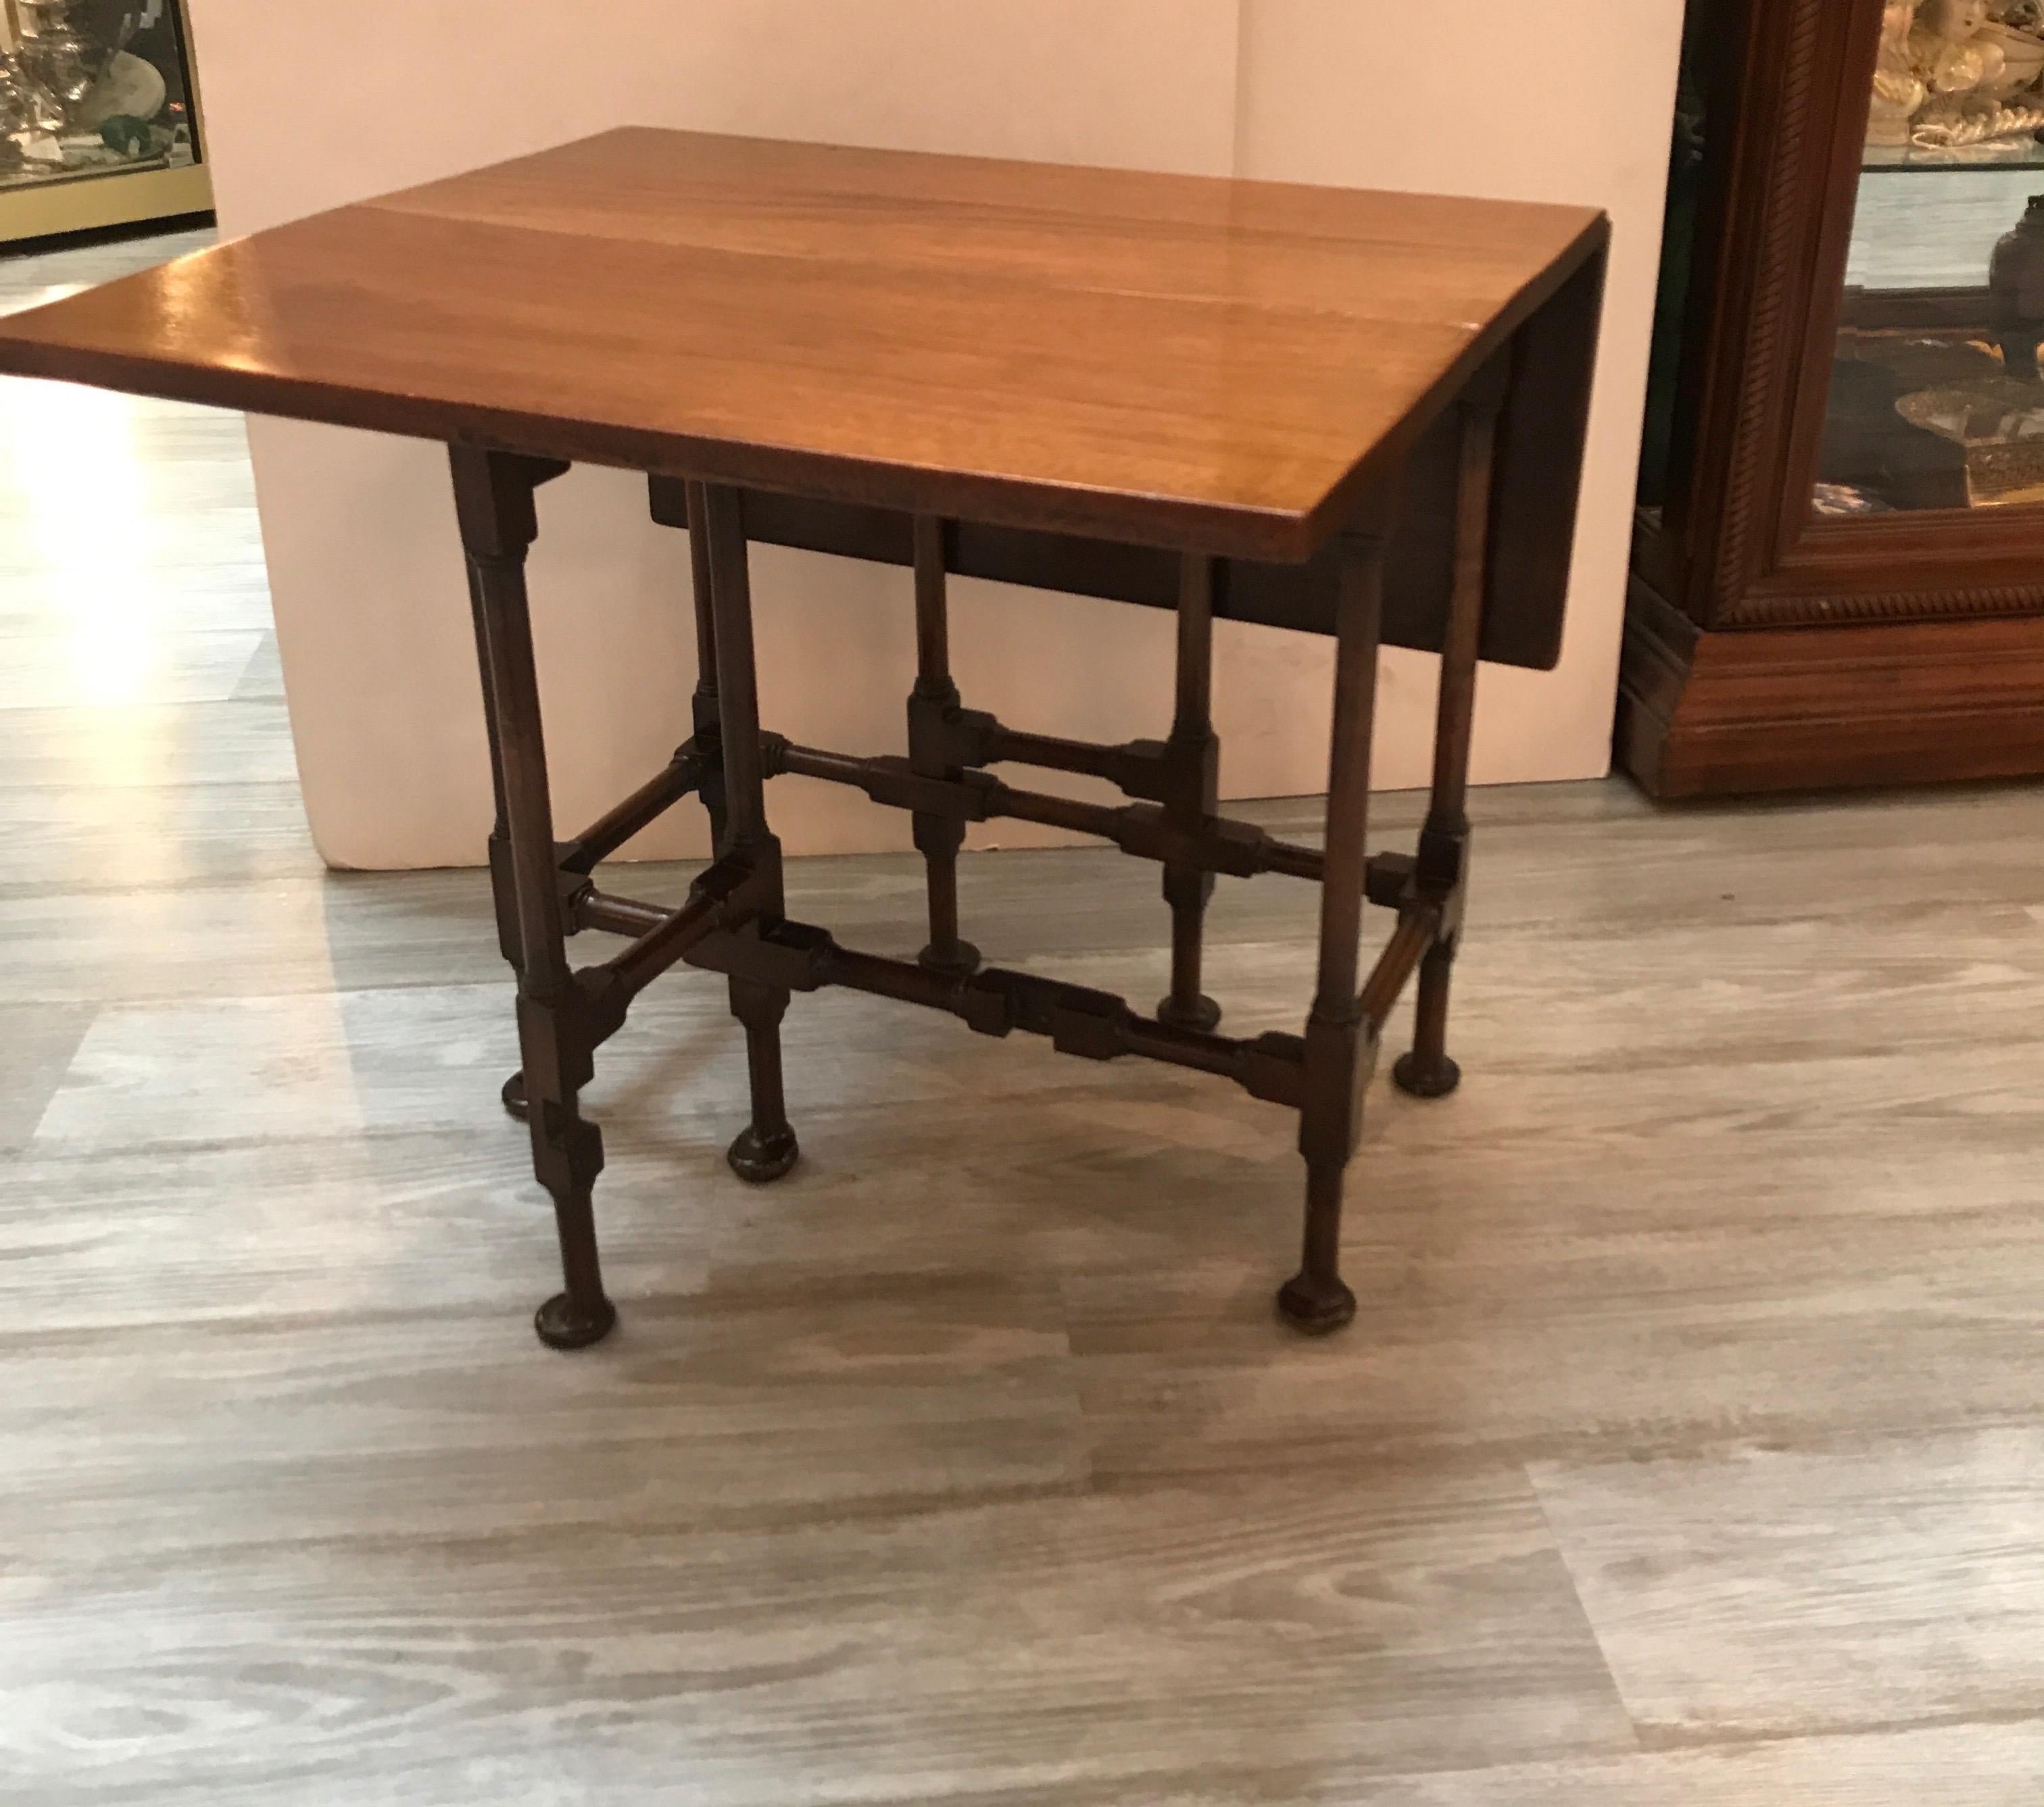 Diminutive mahogany gate leg side table with two drop leaves. The slim table with hand turned legs with spoon feet, each side with a swinging leg the extends to support a leaf/ 10.75 wide,opens to 27 inches. 21.5 inches long, 20 inches high. A great